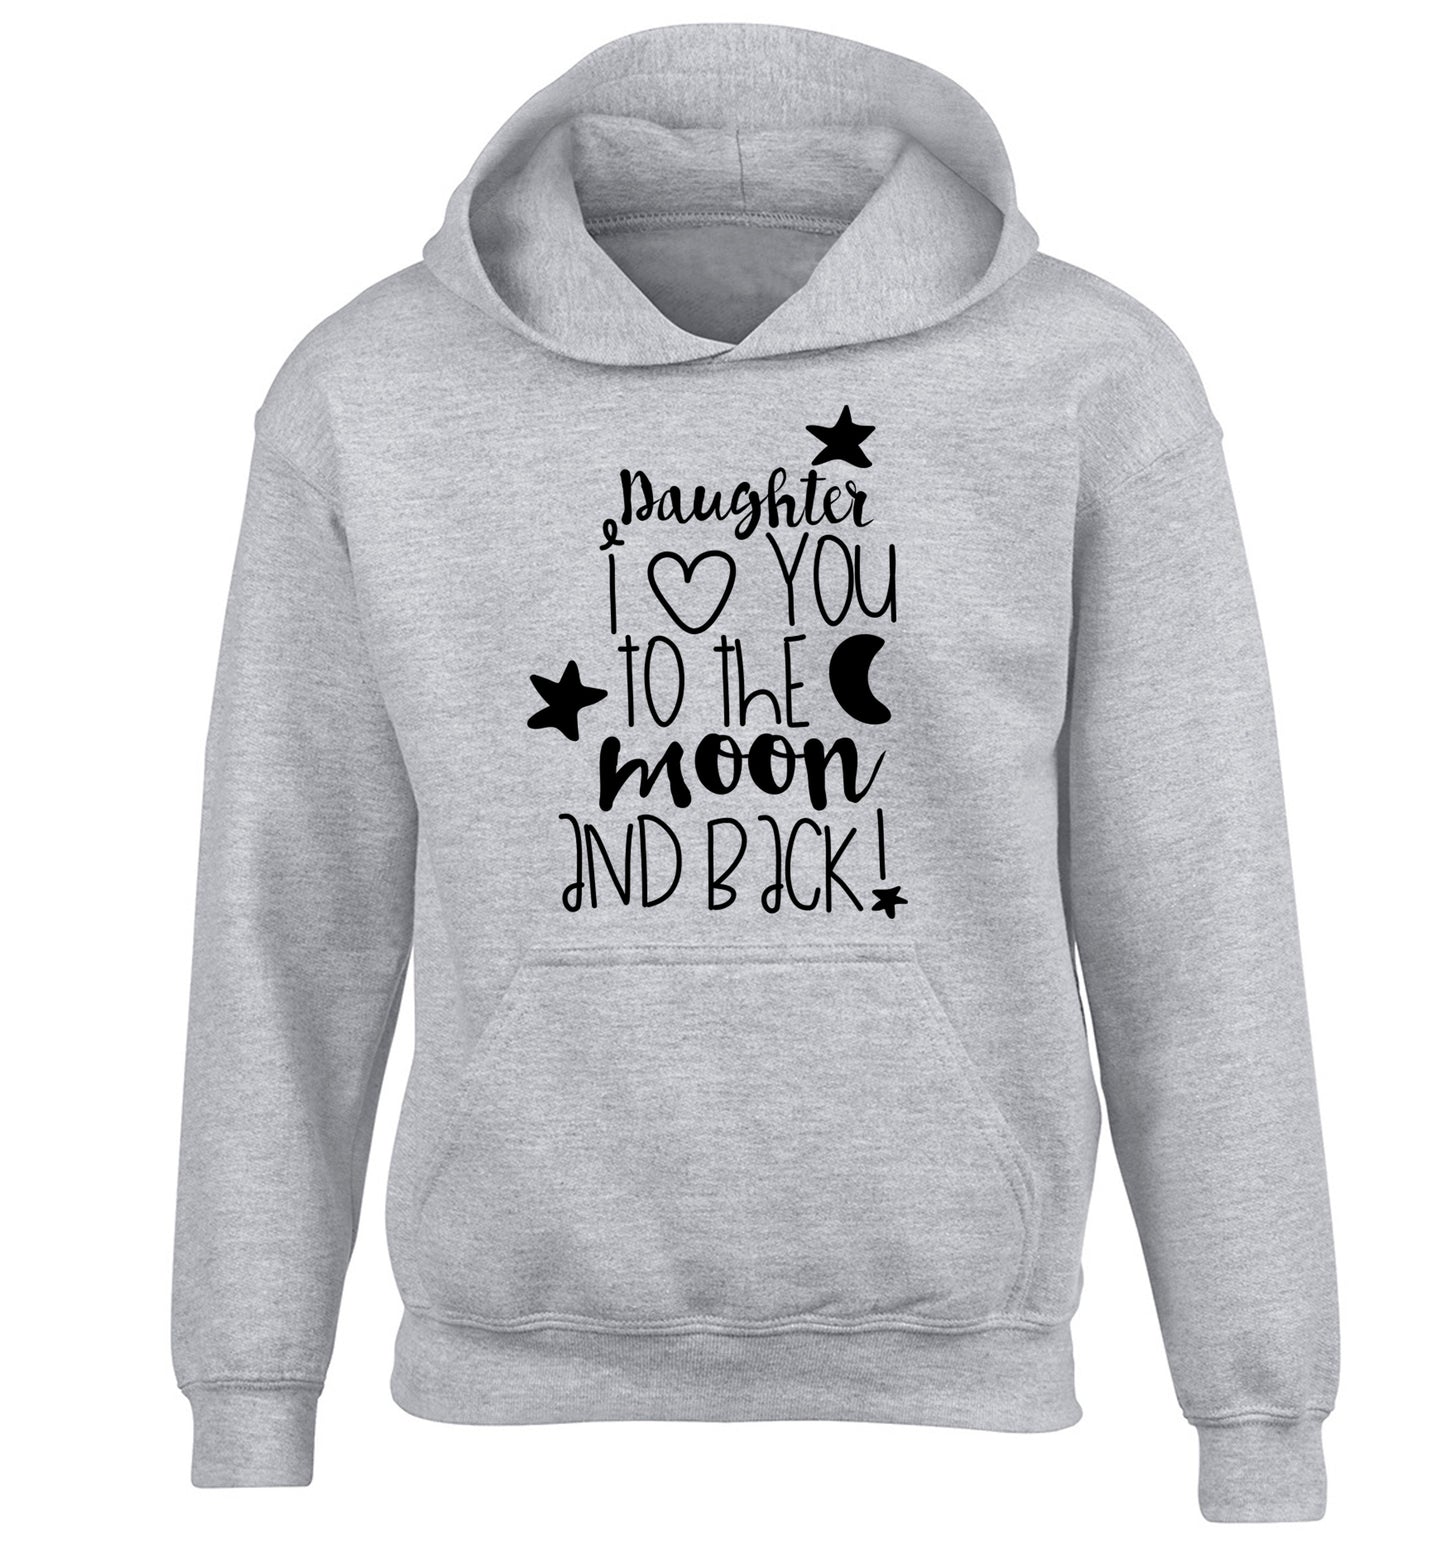 Daughter I love you to the moon and back children's grey hoodie 12-14 Years